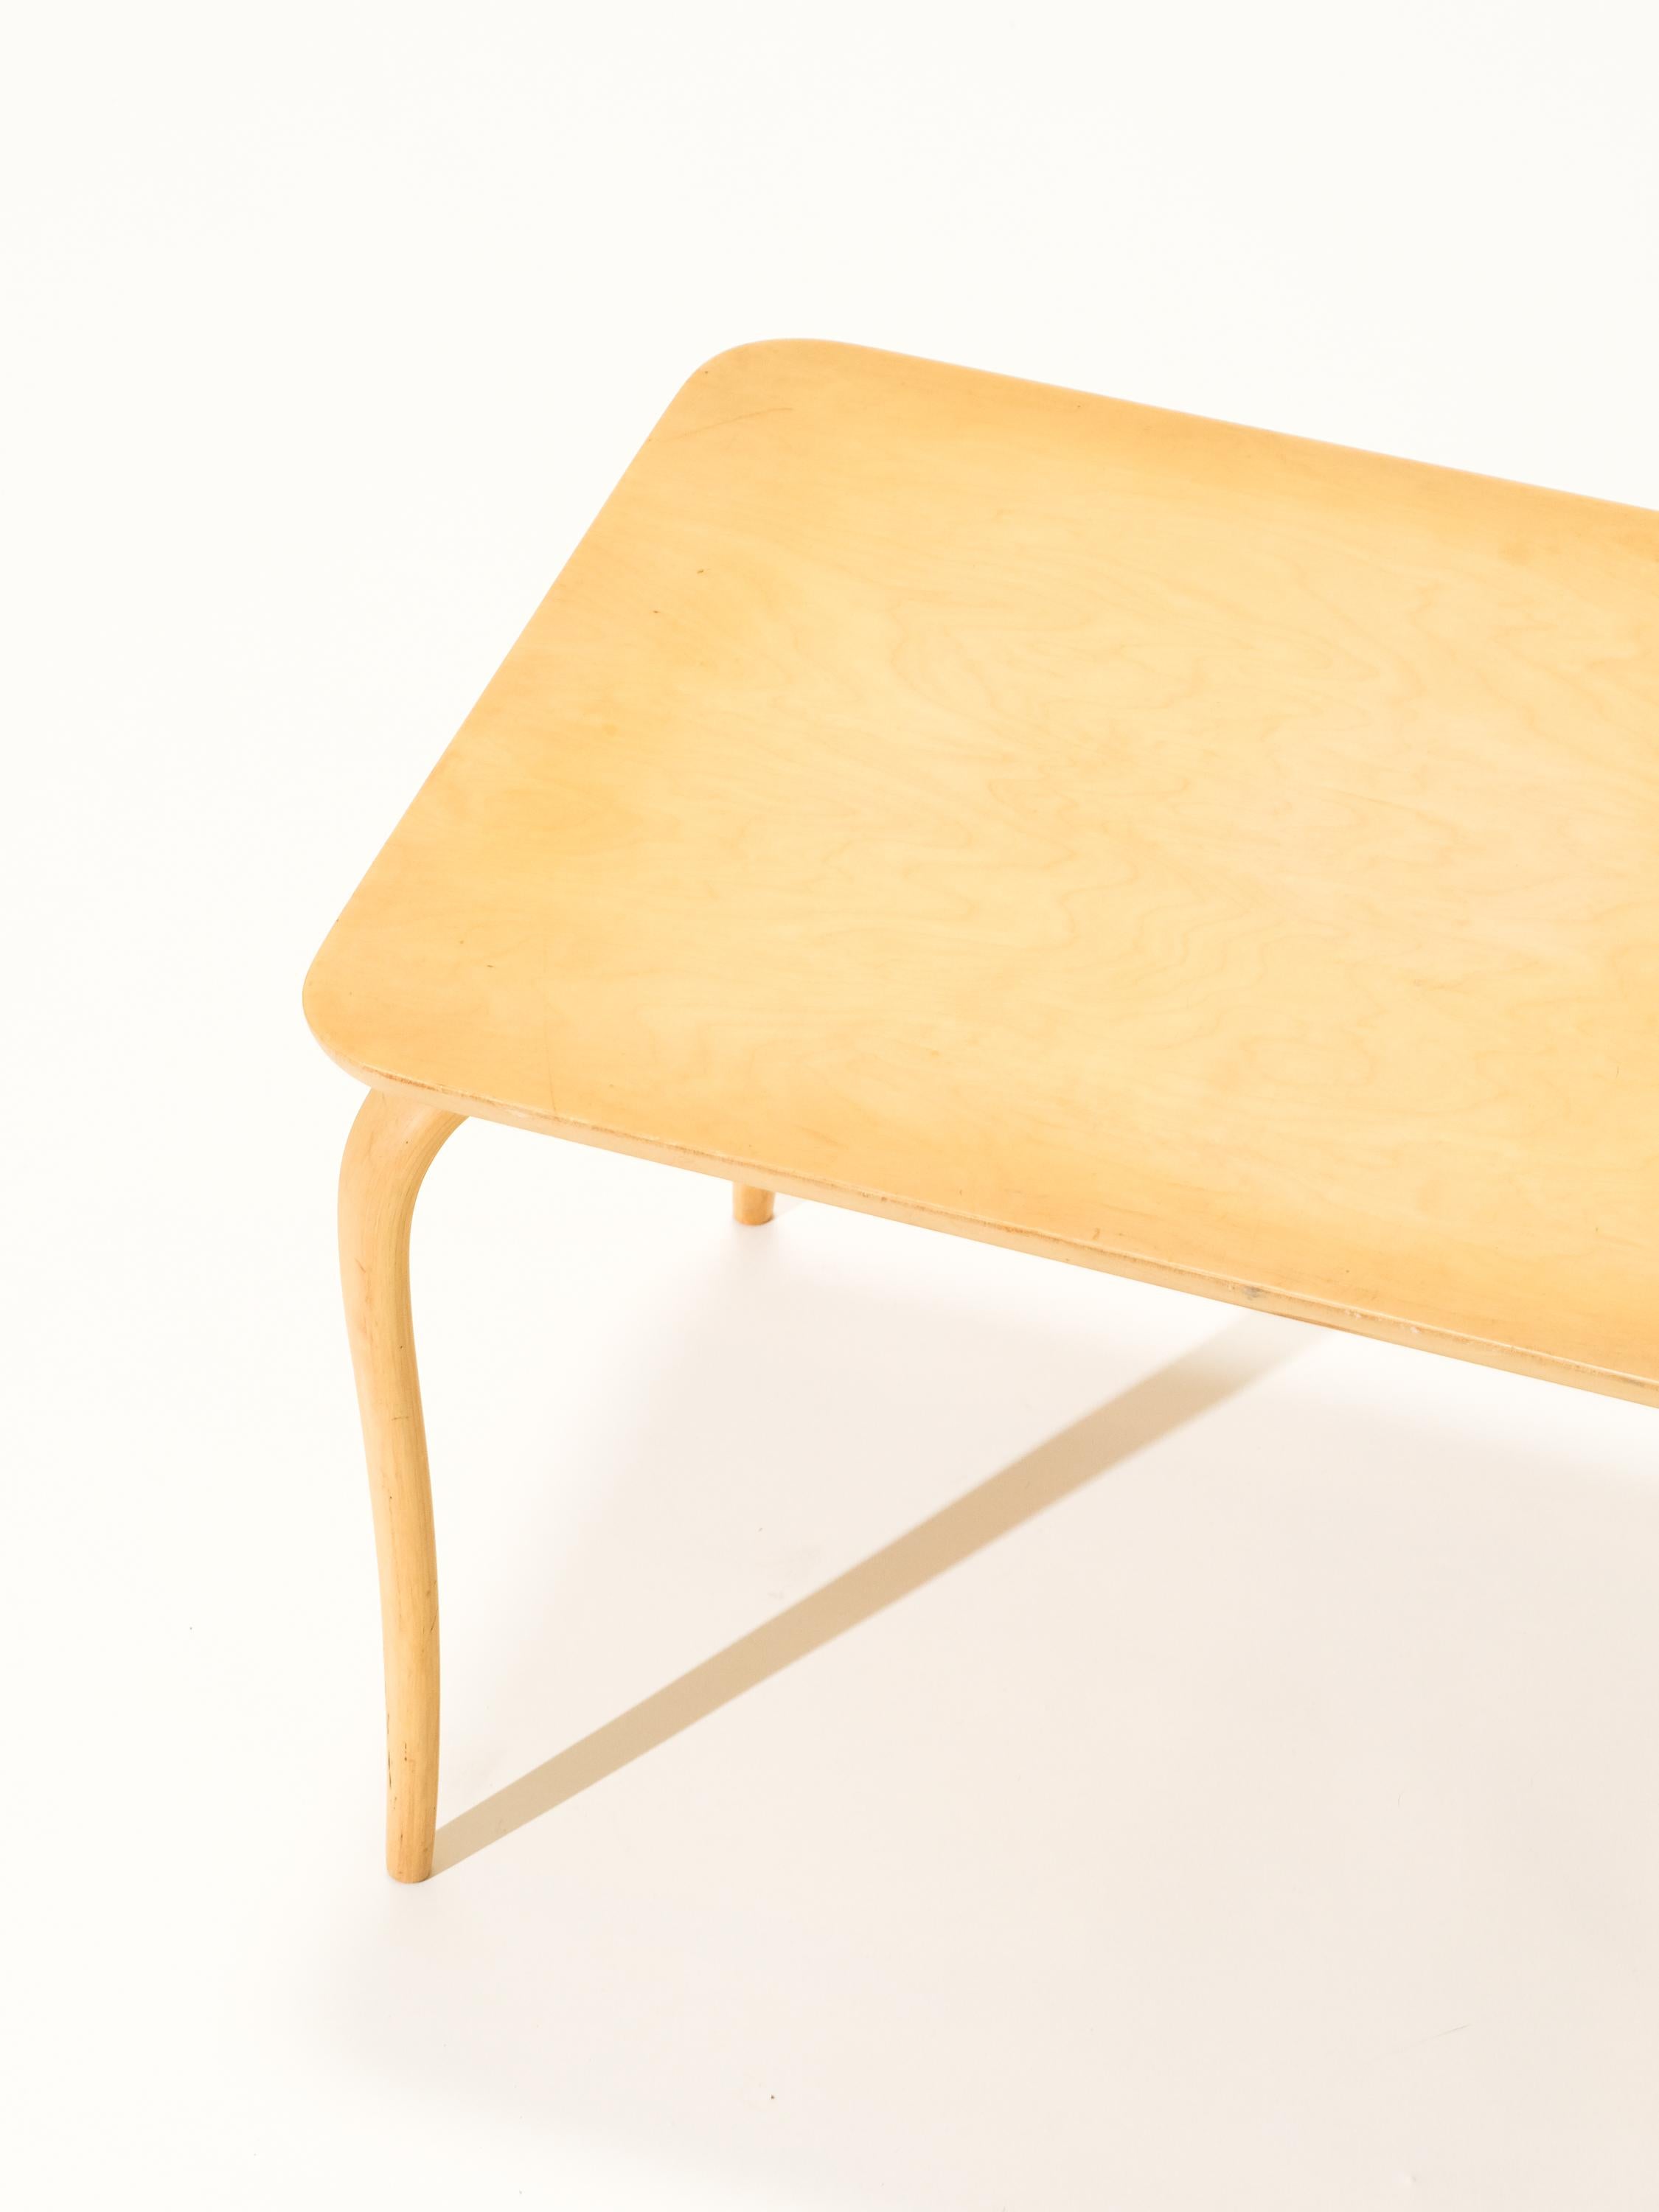 Mid-20th Century Birch Side Table “Annika” by Bruno Mathsson for Karl Mathsson, Sweden, 1960s For Sale